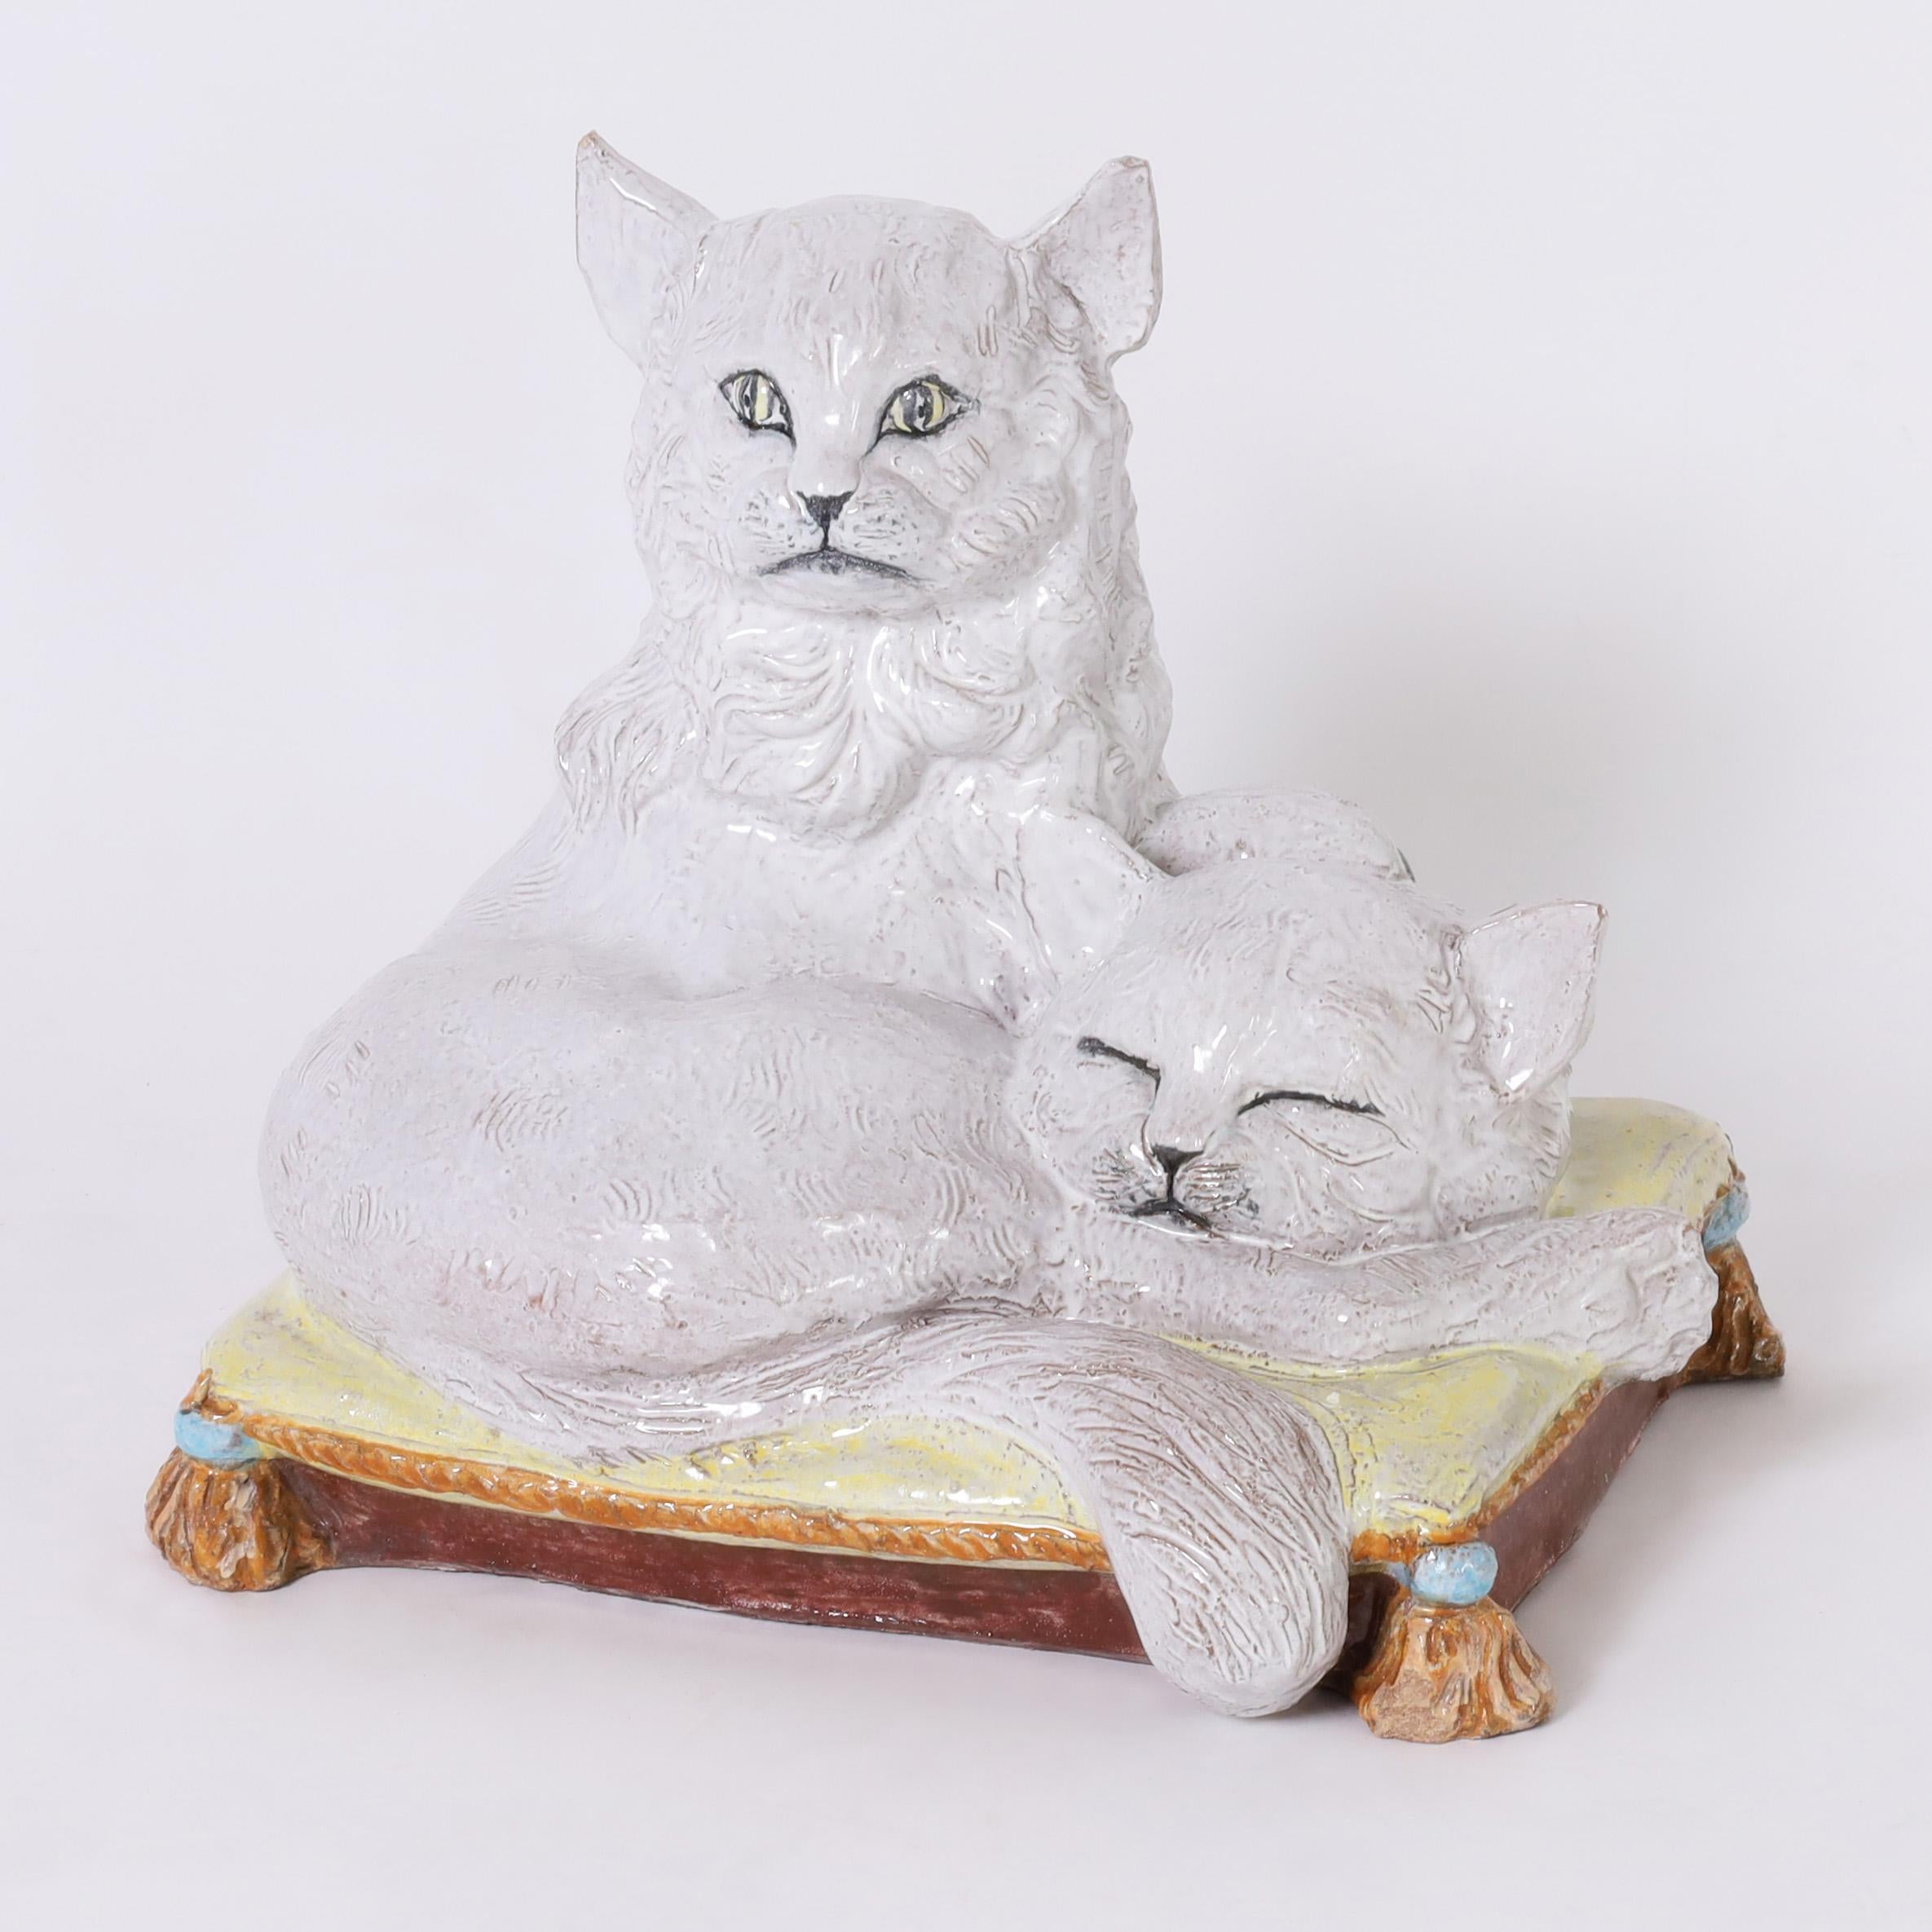 Vintage Italian Terra Cotta Two Cats on a Pillow - Sculpture by Unknown